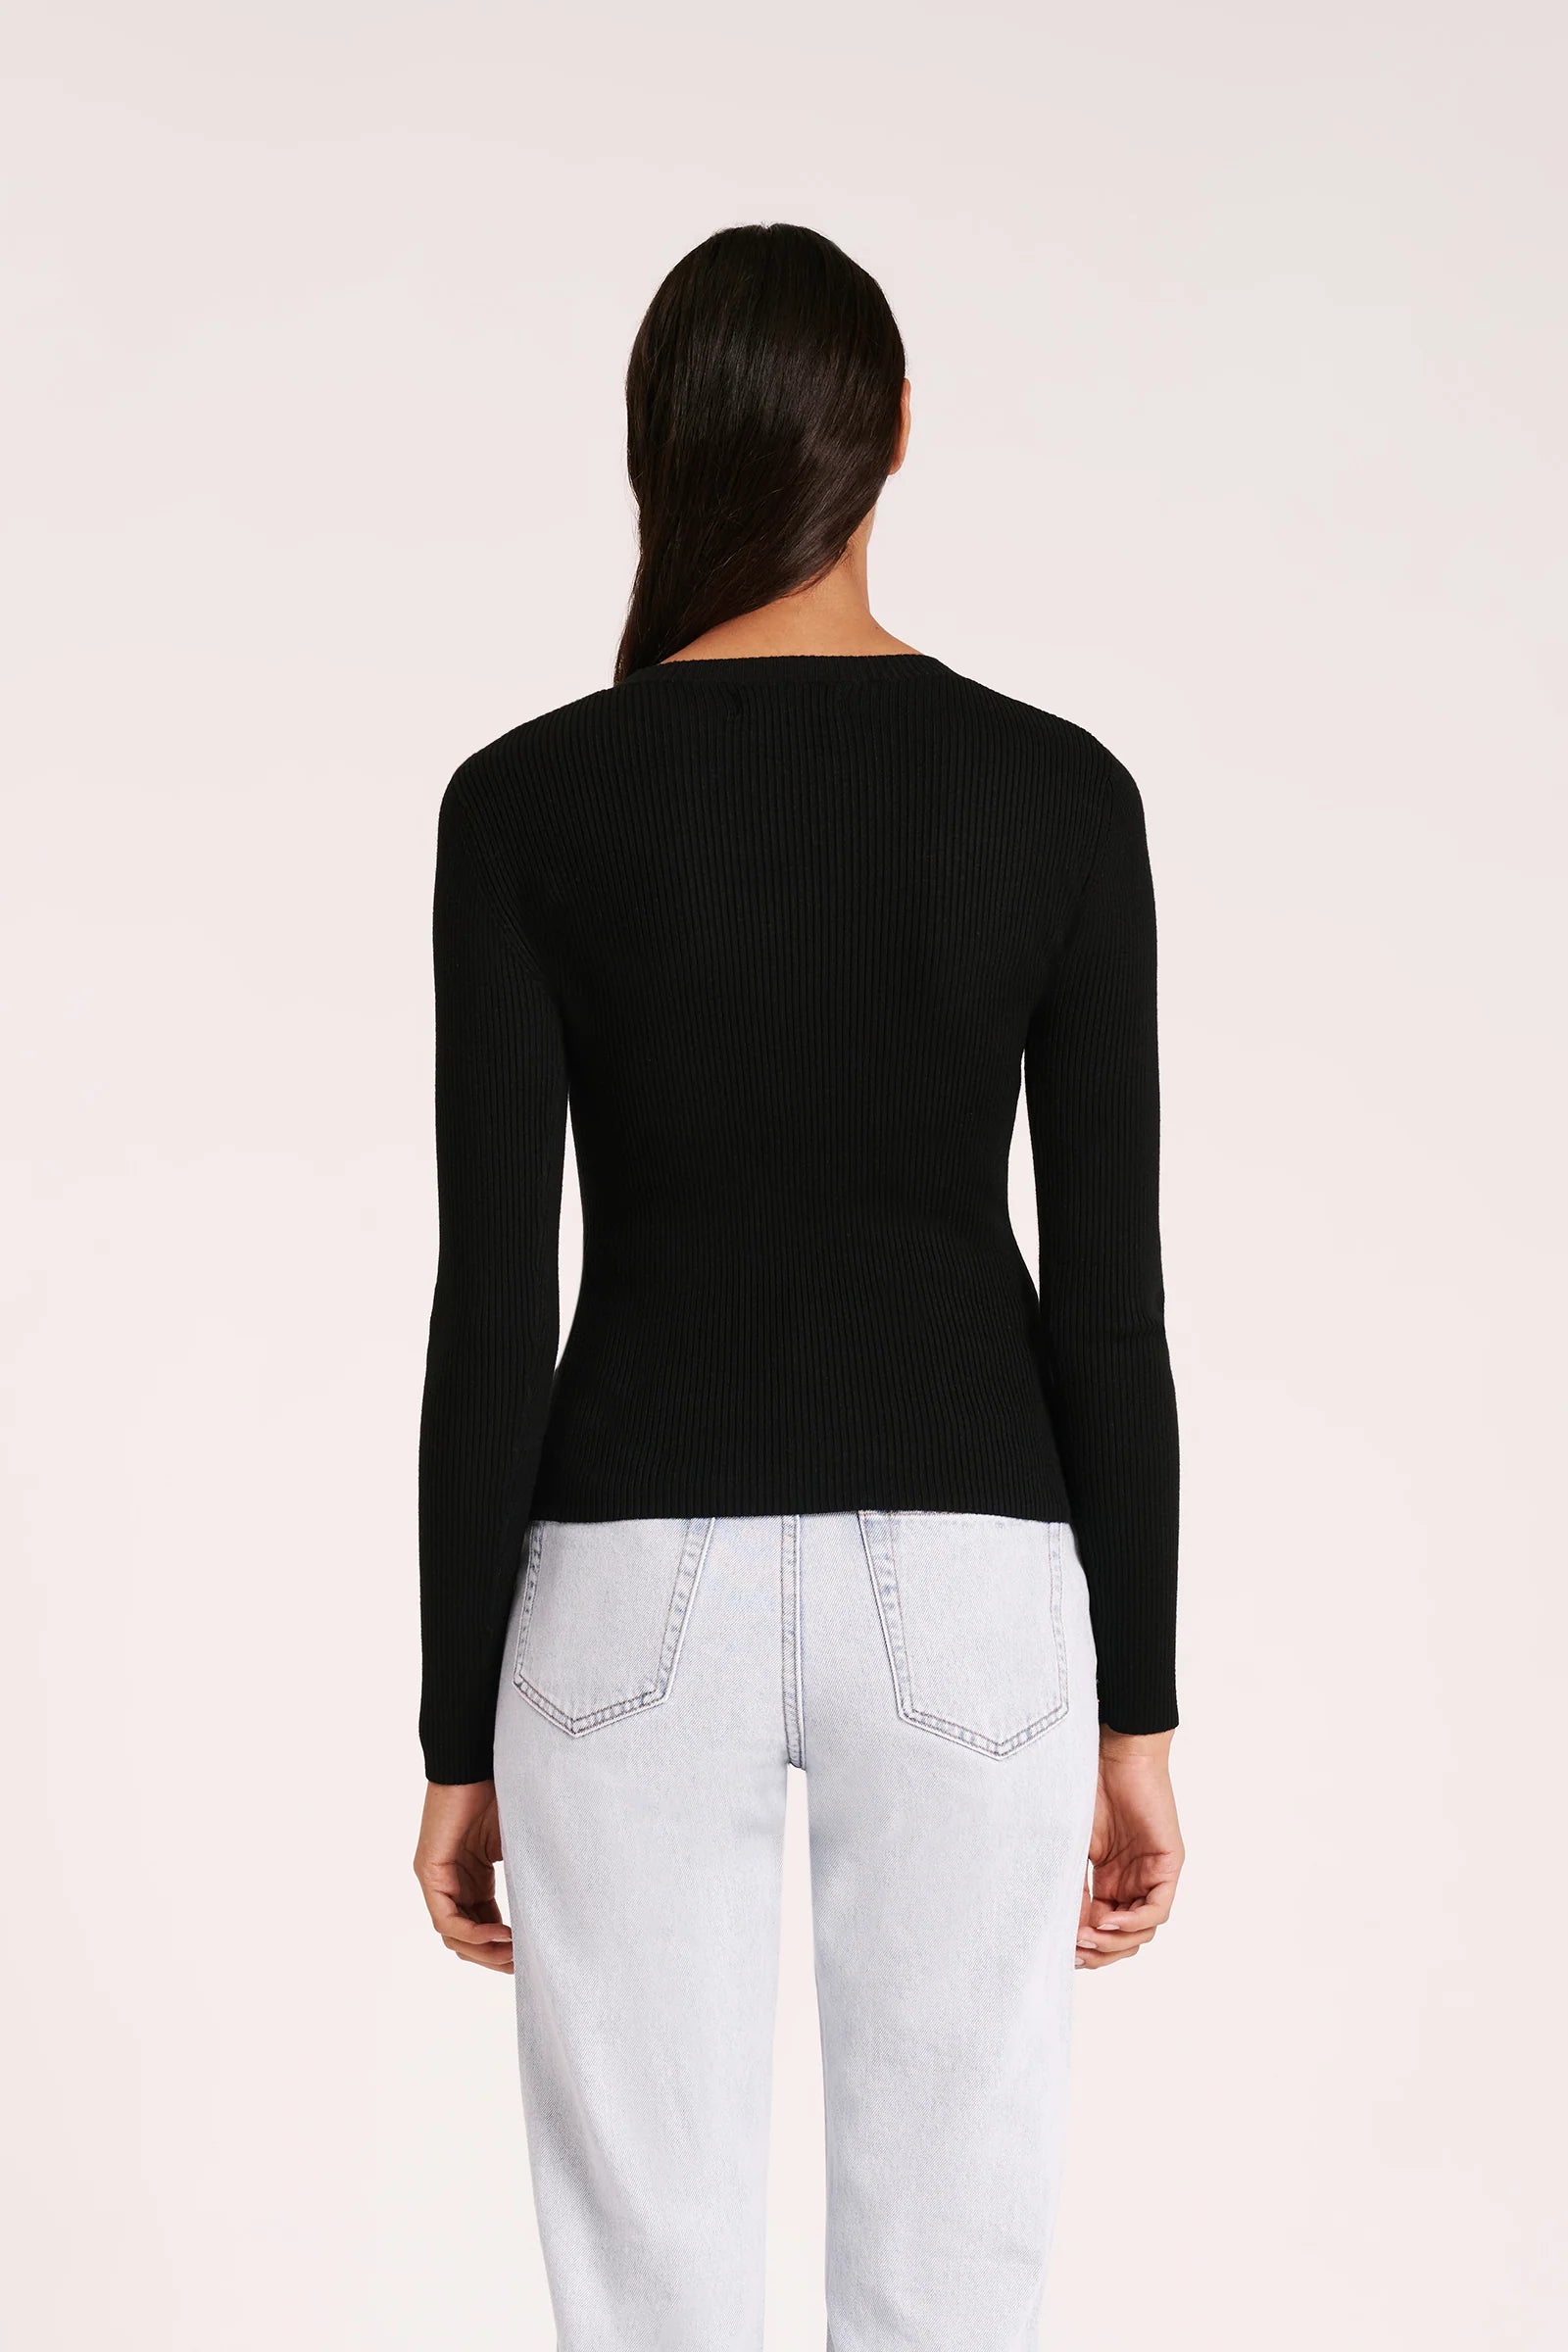 Nude Lucy | Classic LS Knit - Black